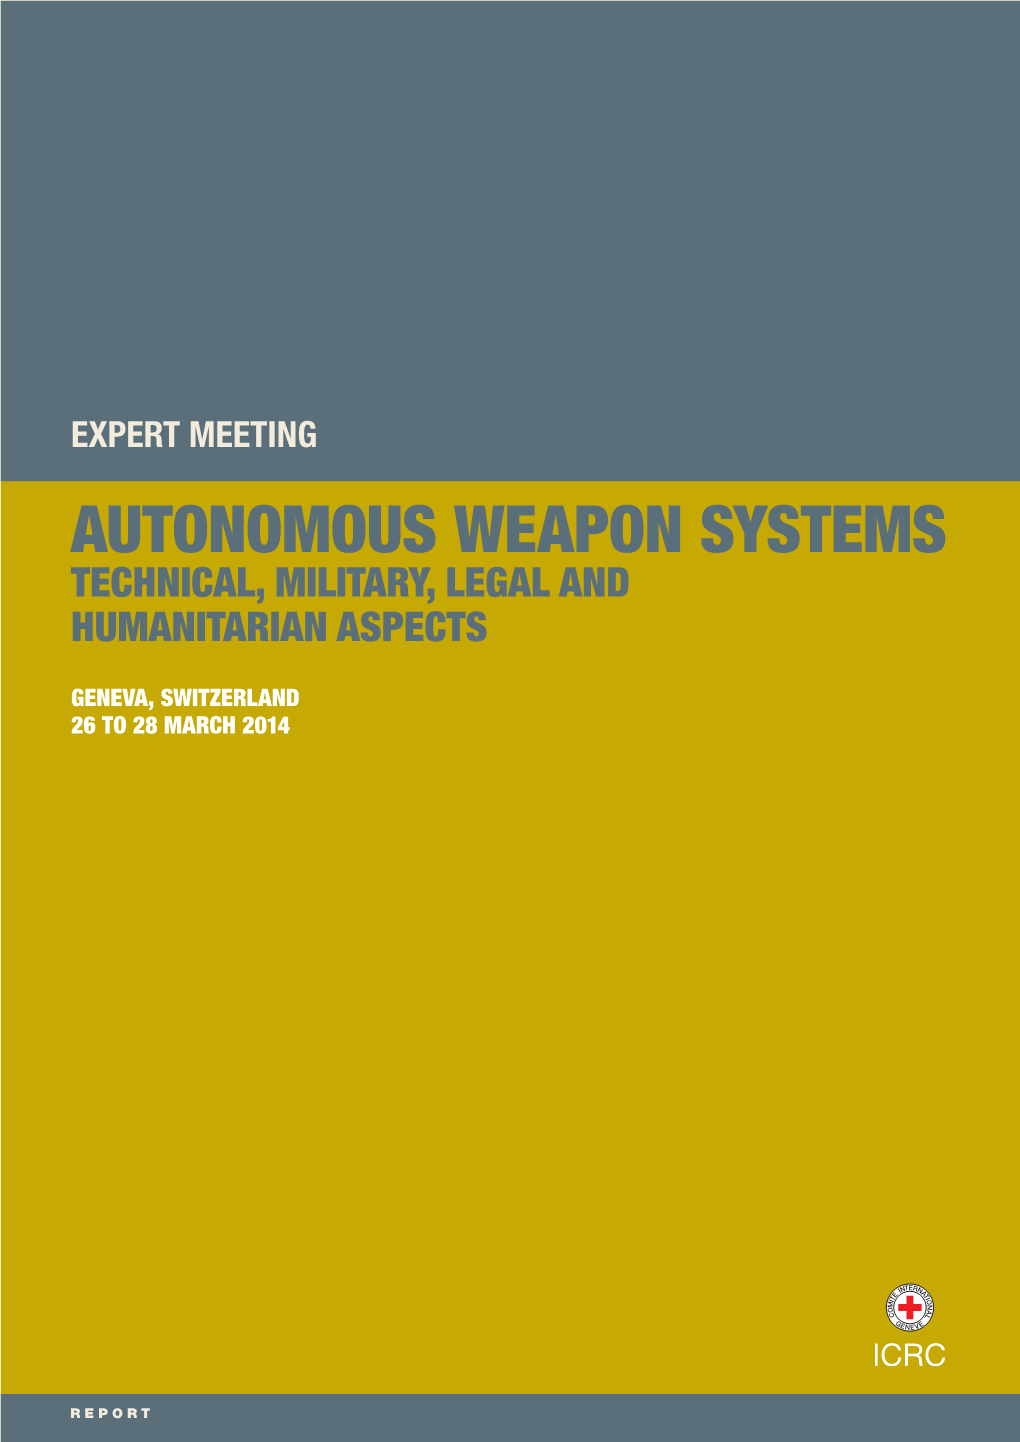 Autonomous Weapon Systems: Technical, Military, Legal and Humanitarian Aspects